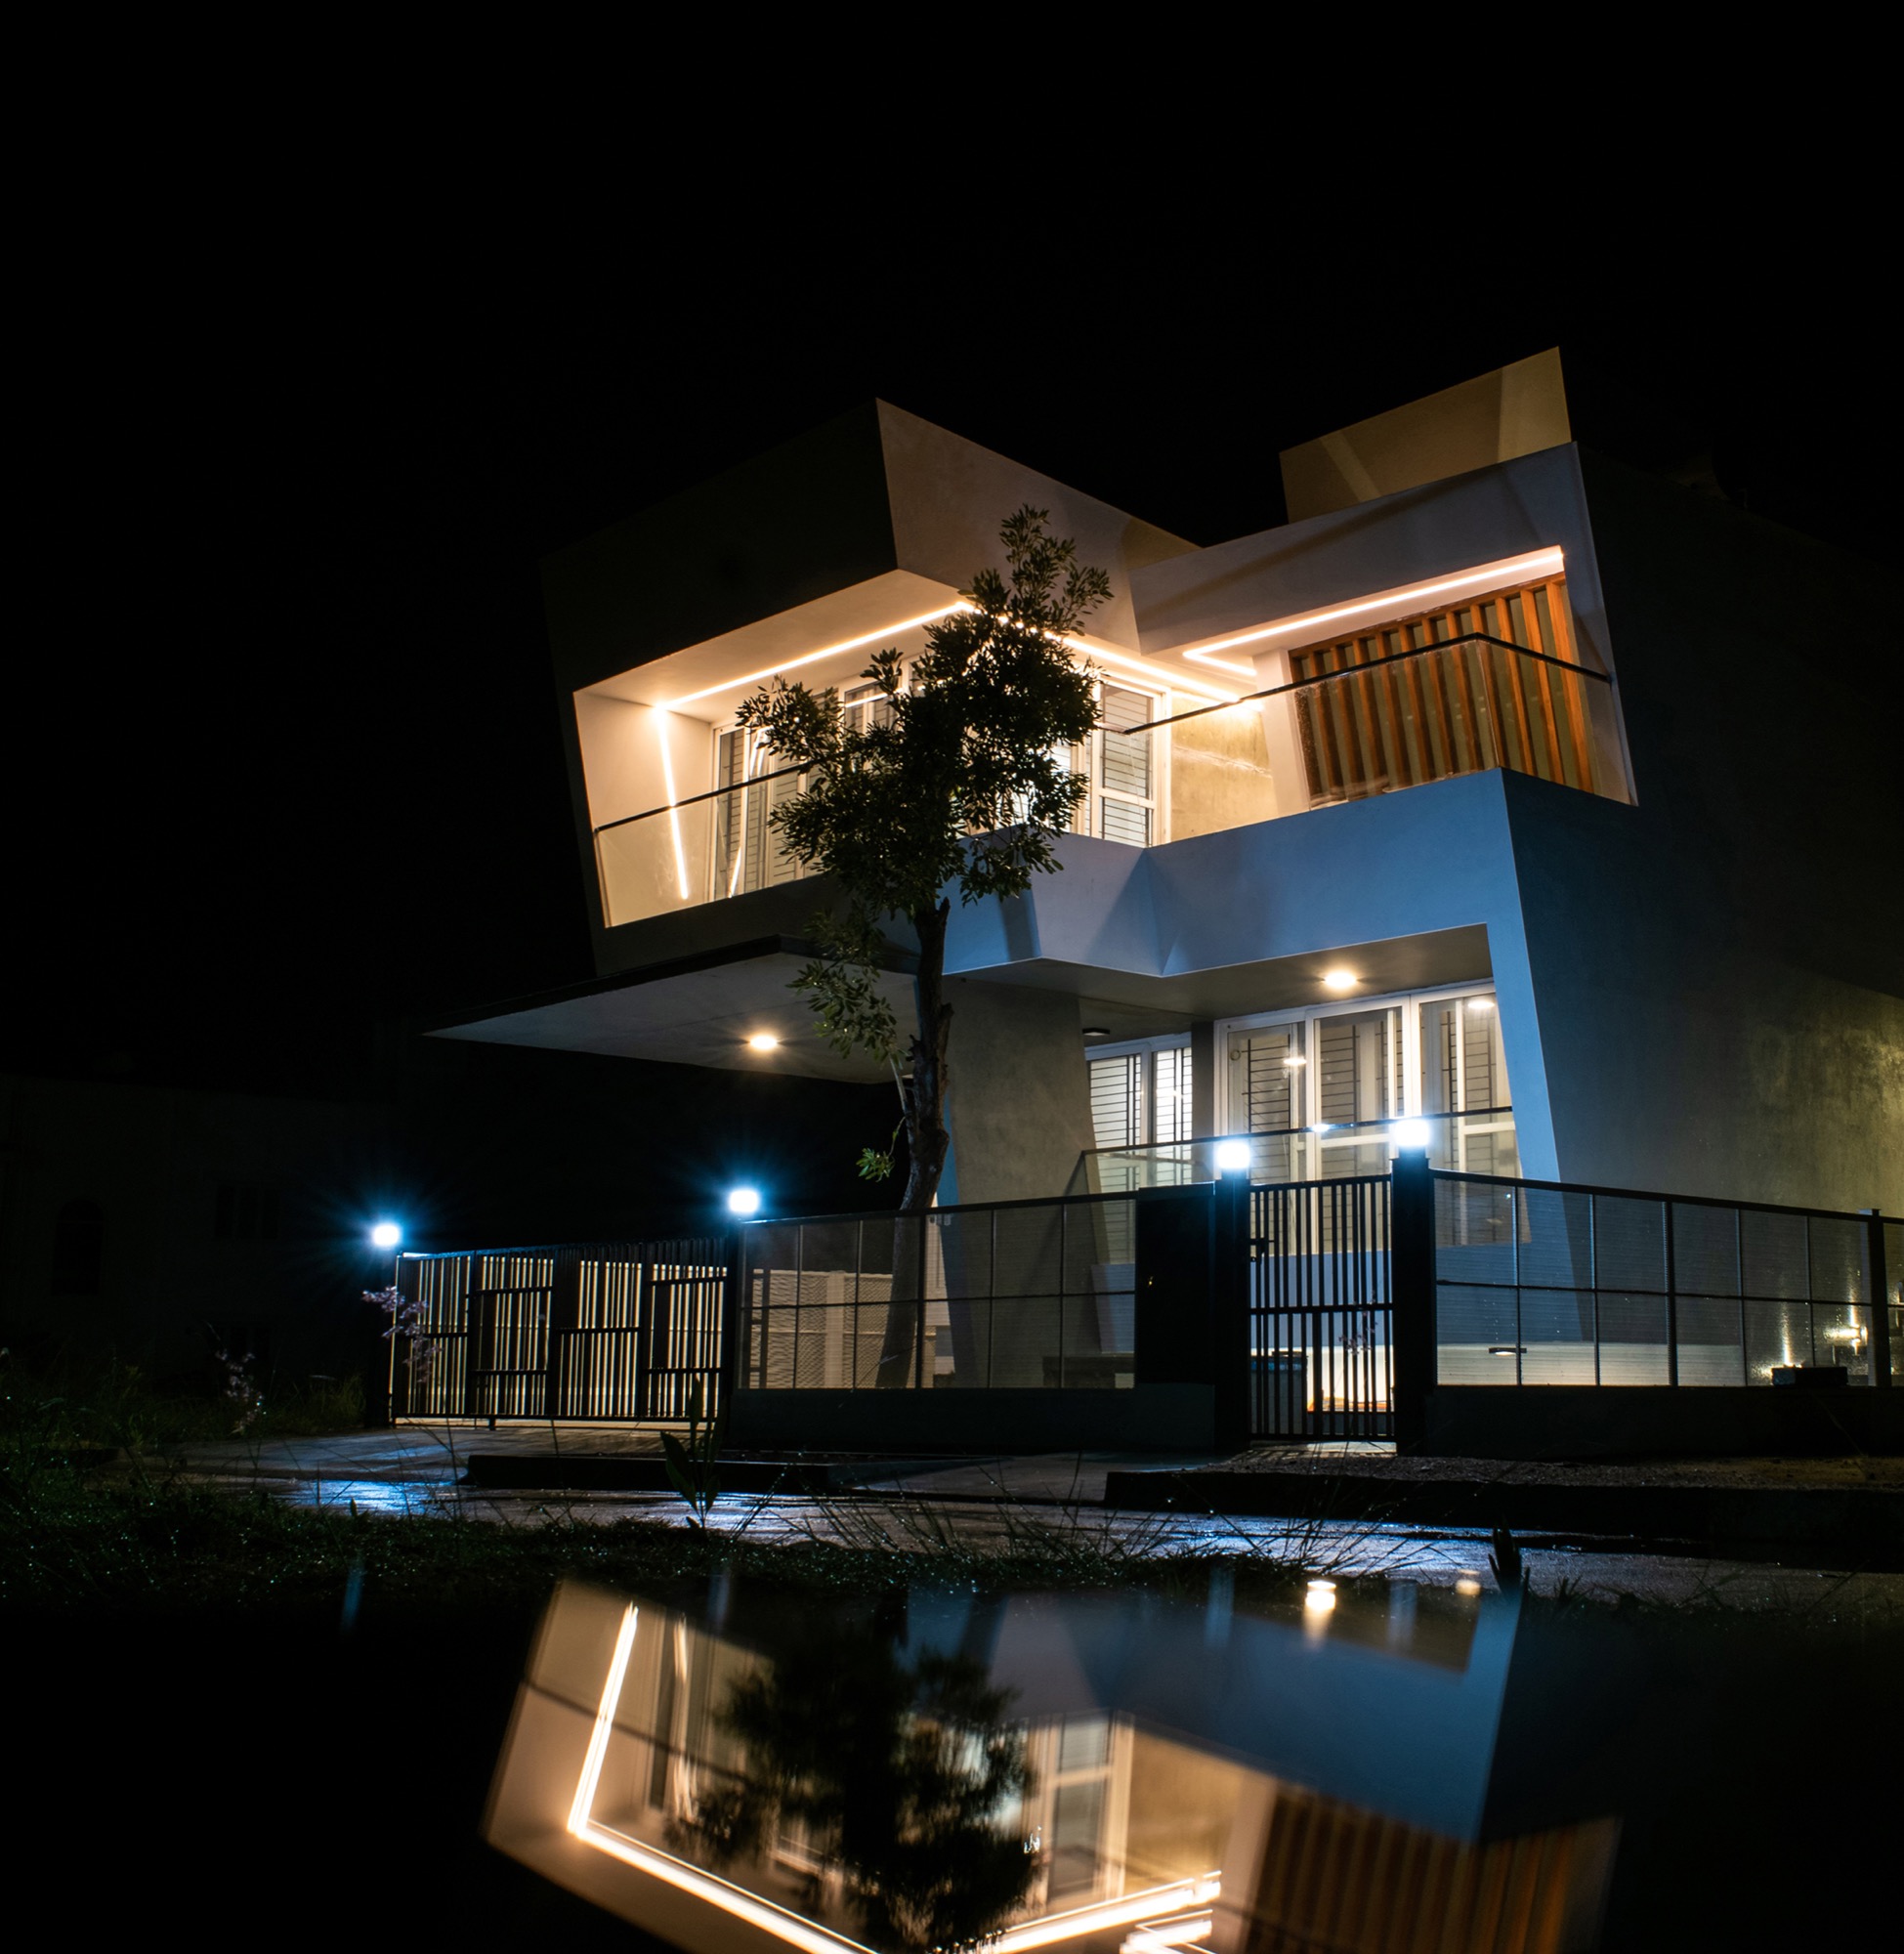 House in the Golf Course, Bengaluru, by Radical Architecture Design Consultants 29